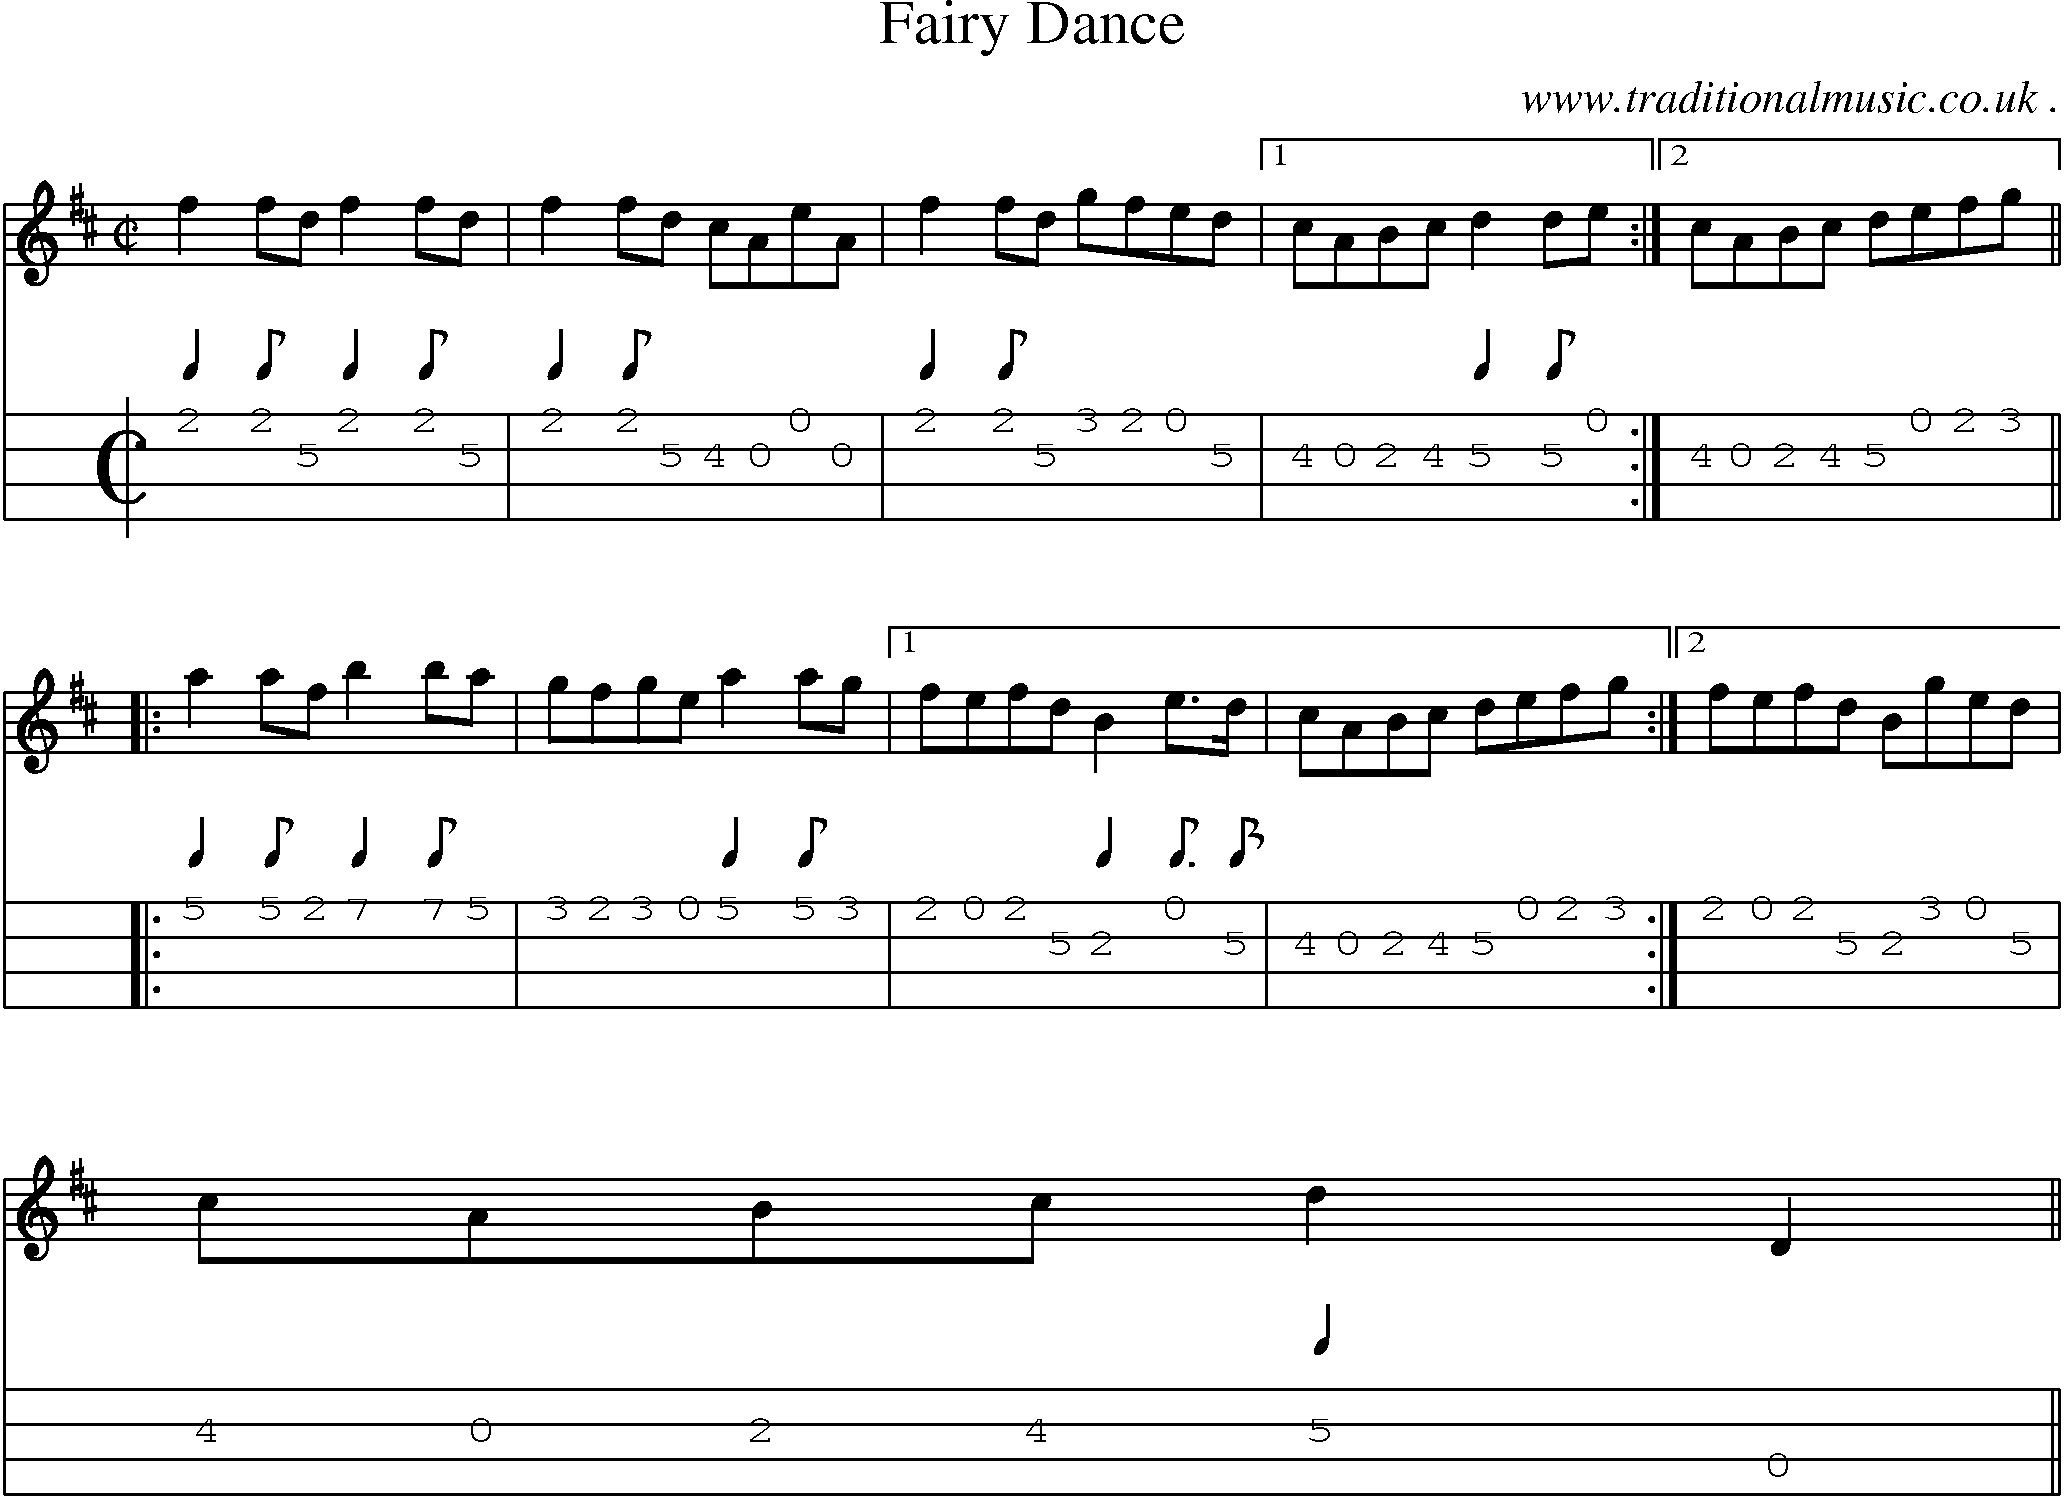 Sheet-music  score, Chords and Mandolin Tabs for Fairy Dance